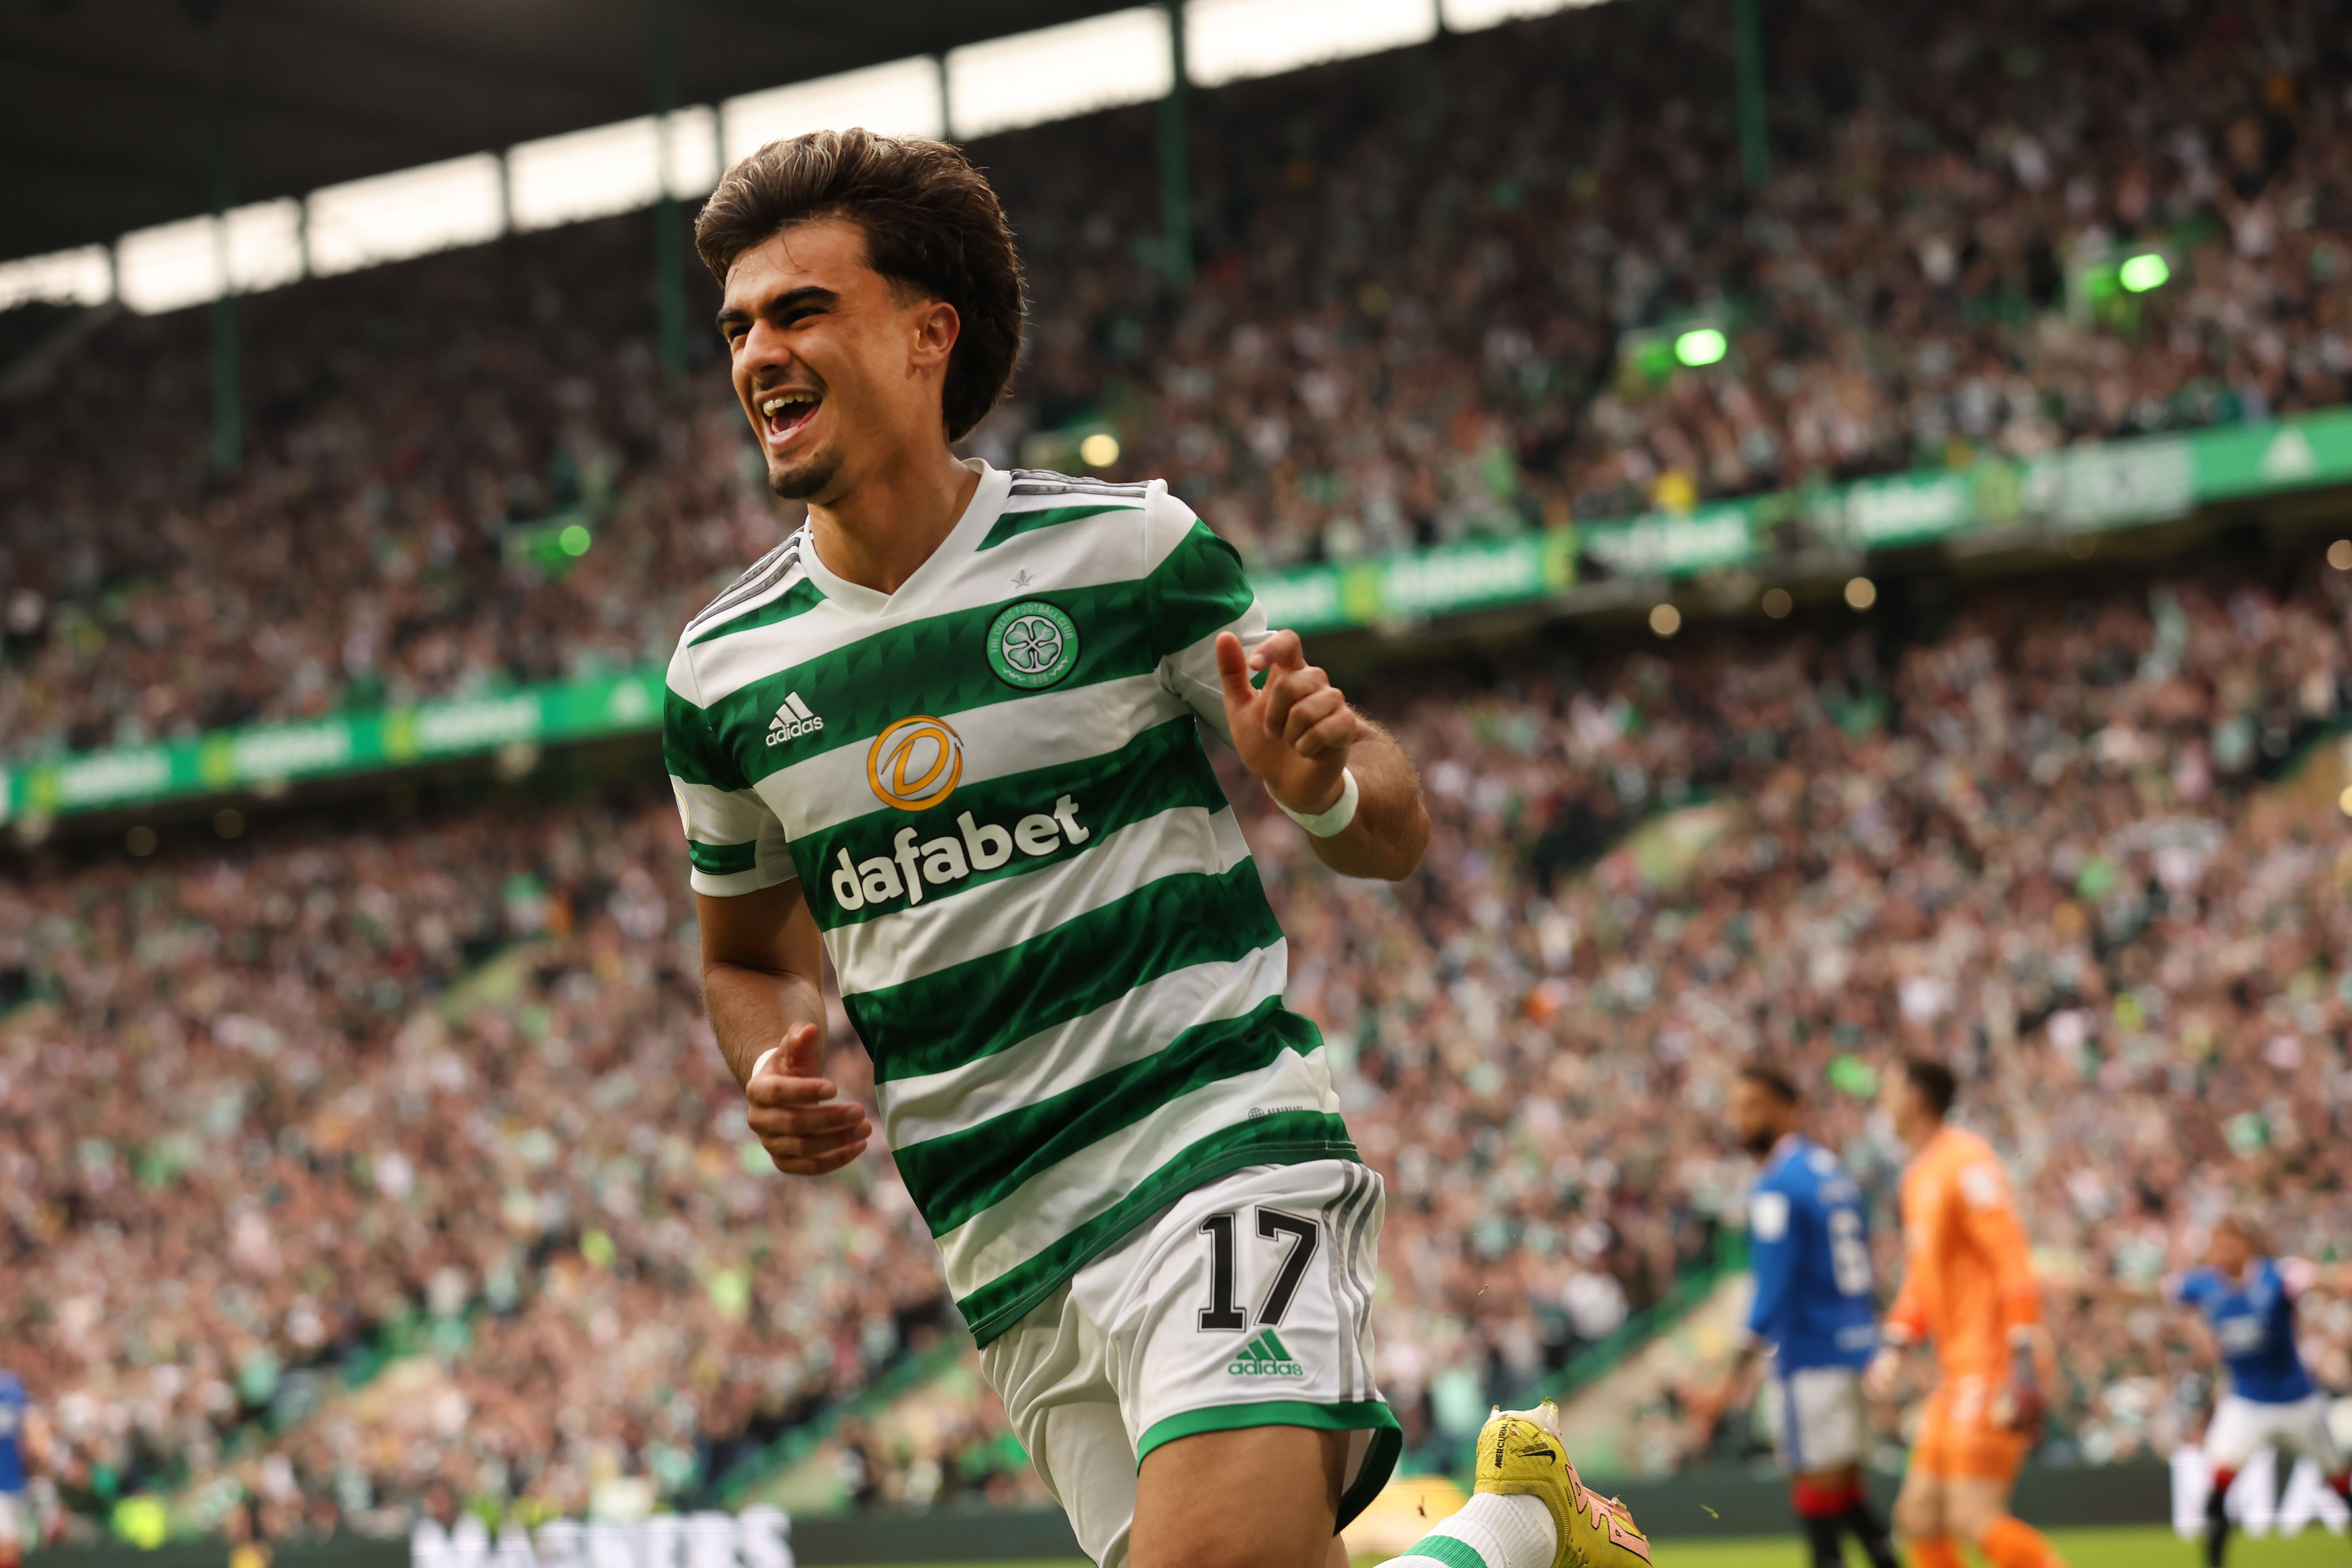 Joao Neves Filipe Jota of Celtic celebrates scoring the second goal during the Cinch Scottish Premiership match between Celtic FC and Rangers FC at on September 03, 2022 in Glasgow, Scotland